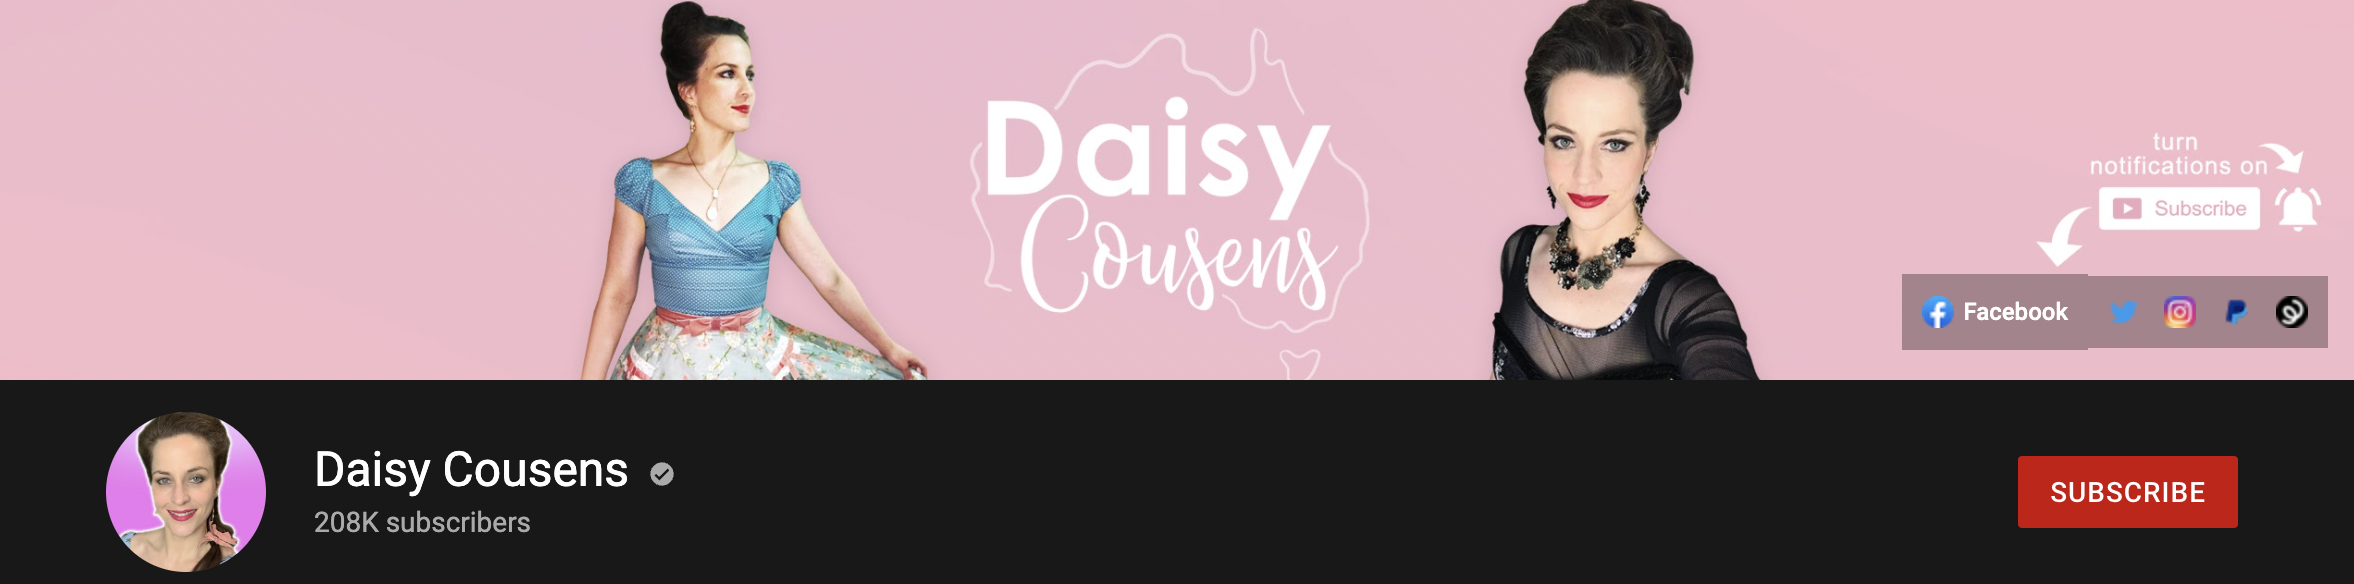 Daisy Cousens Youtube Channel